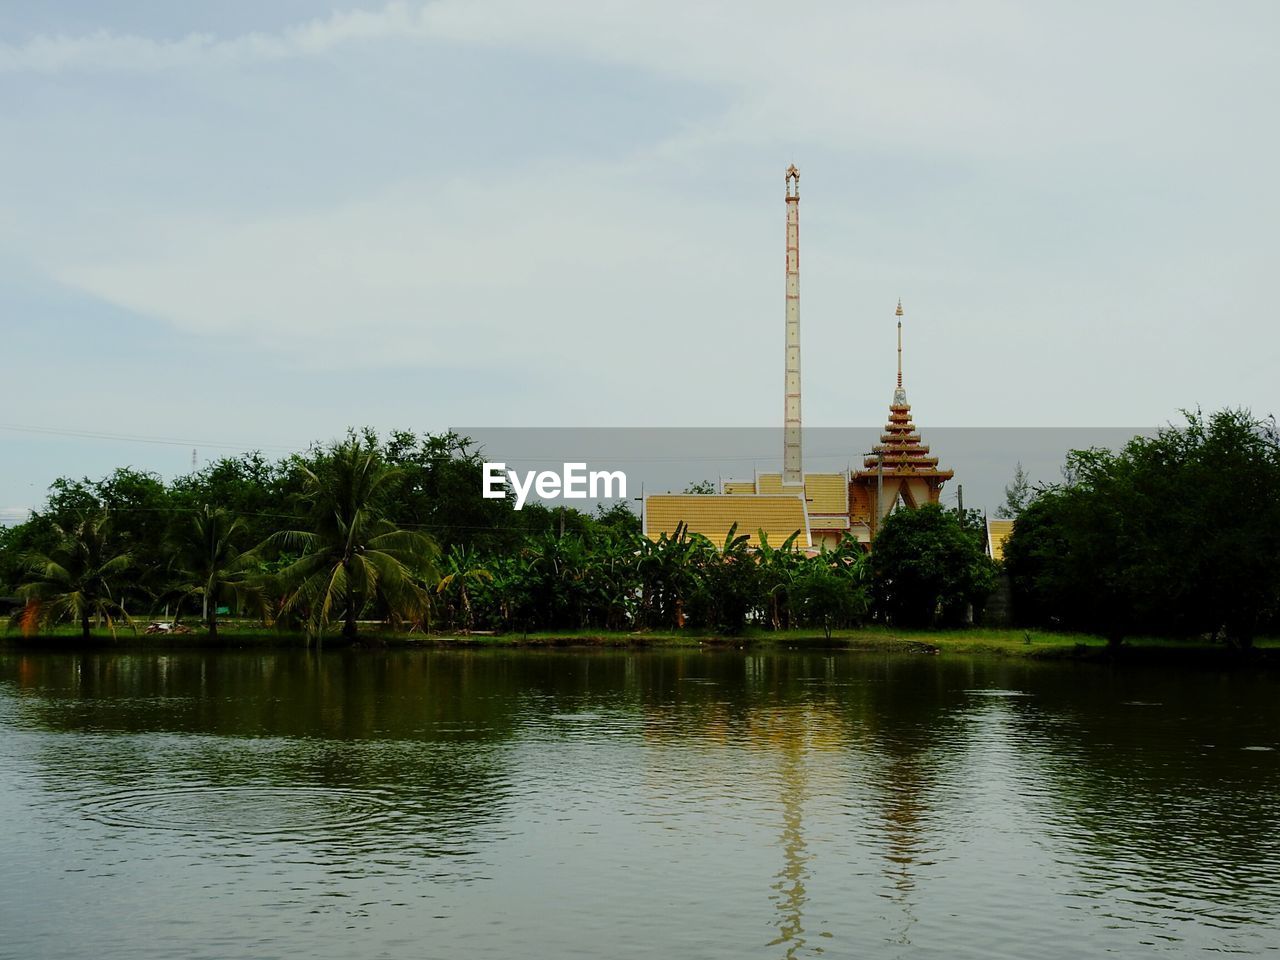 VIEW OF TEMPLE AT WATERFRONT